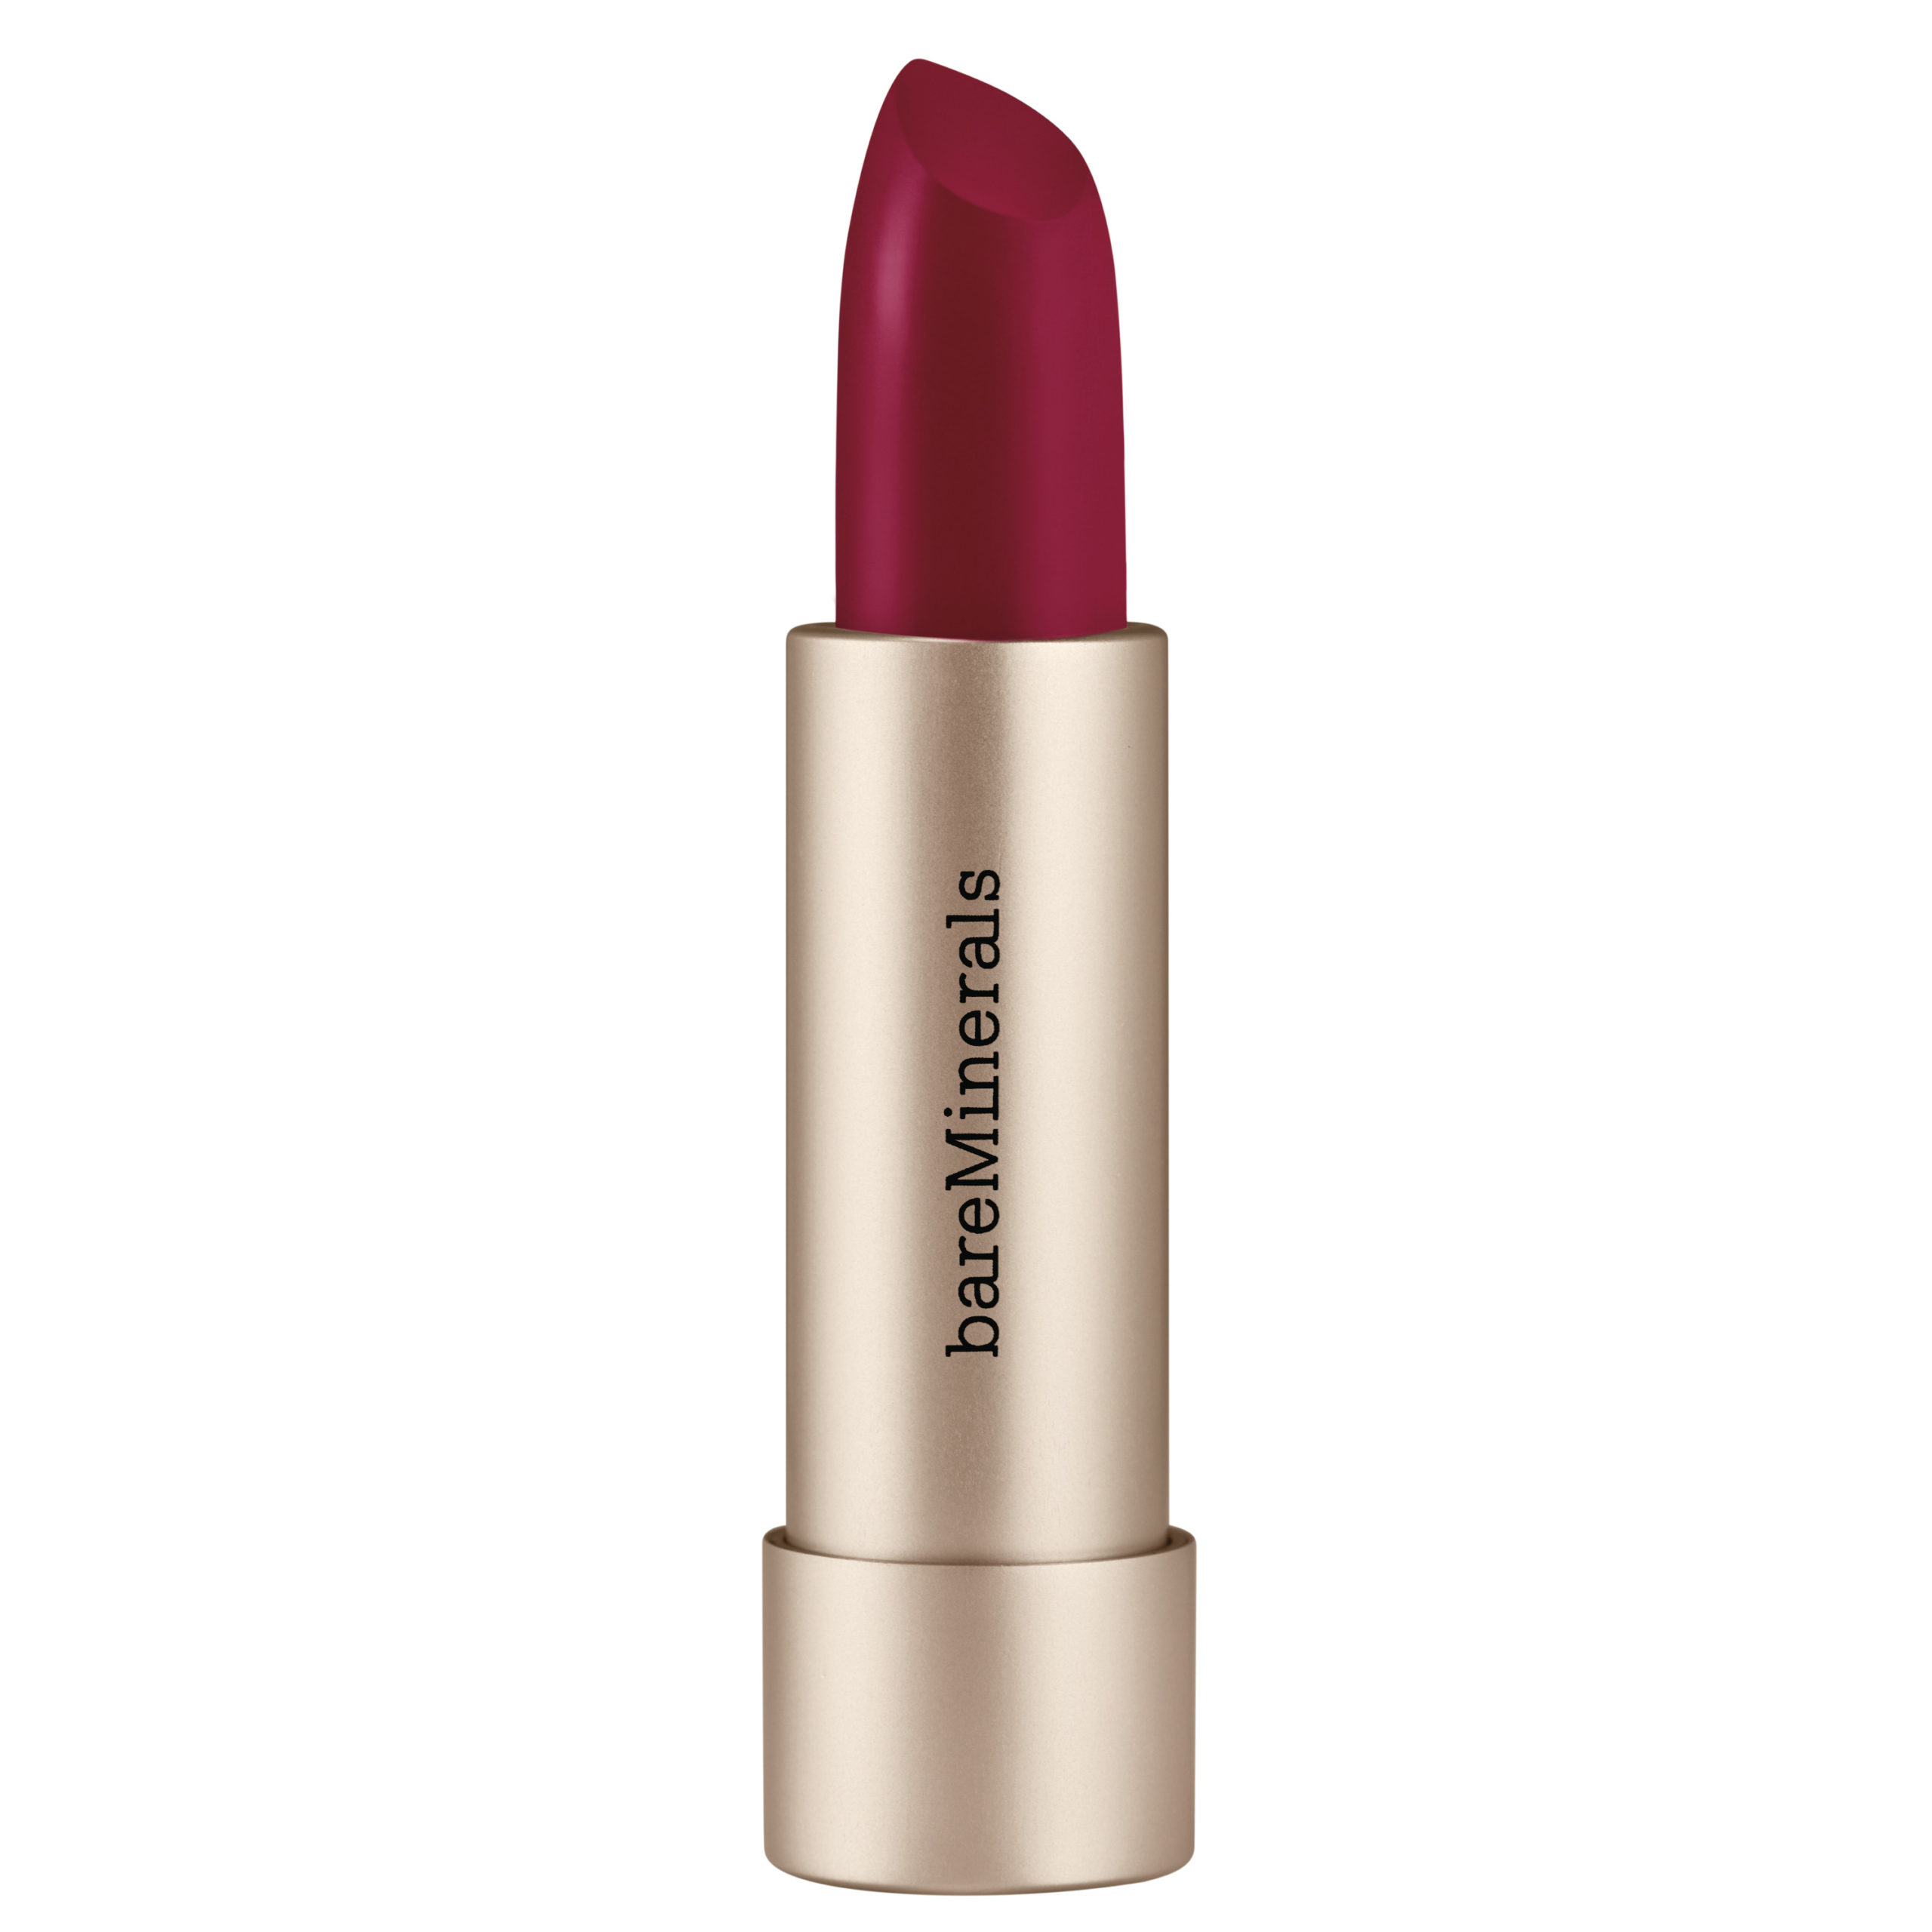  Mineralist Hydra-Smoothing Lipstick, Fortitude